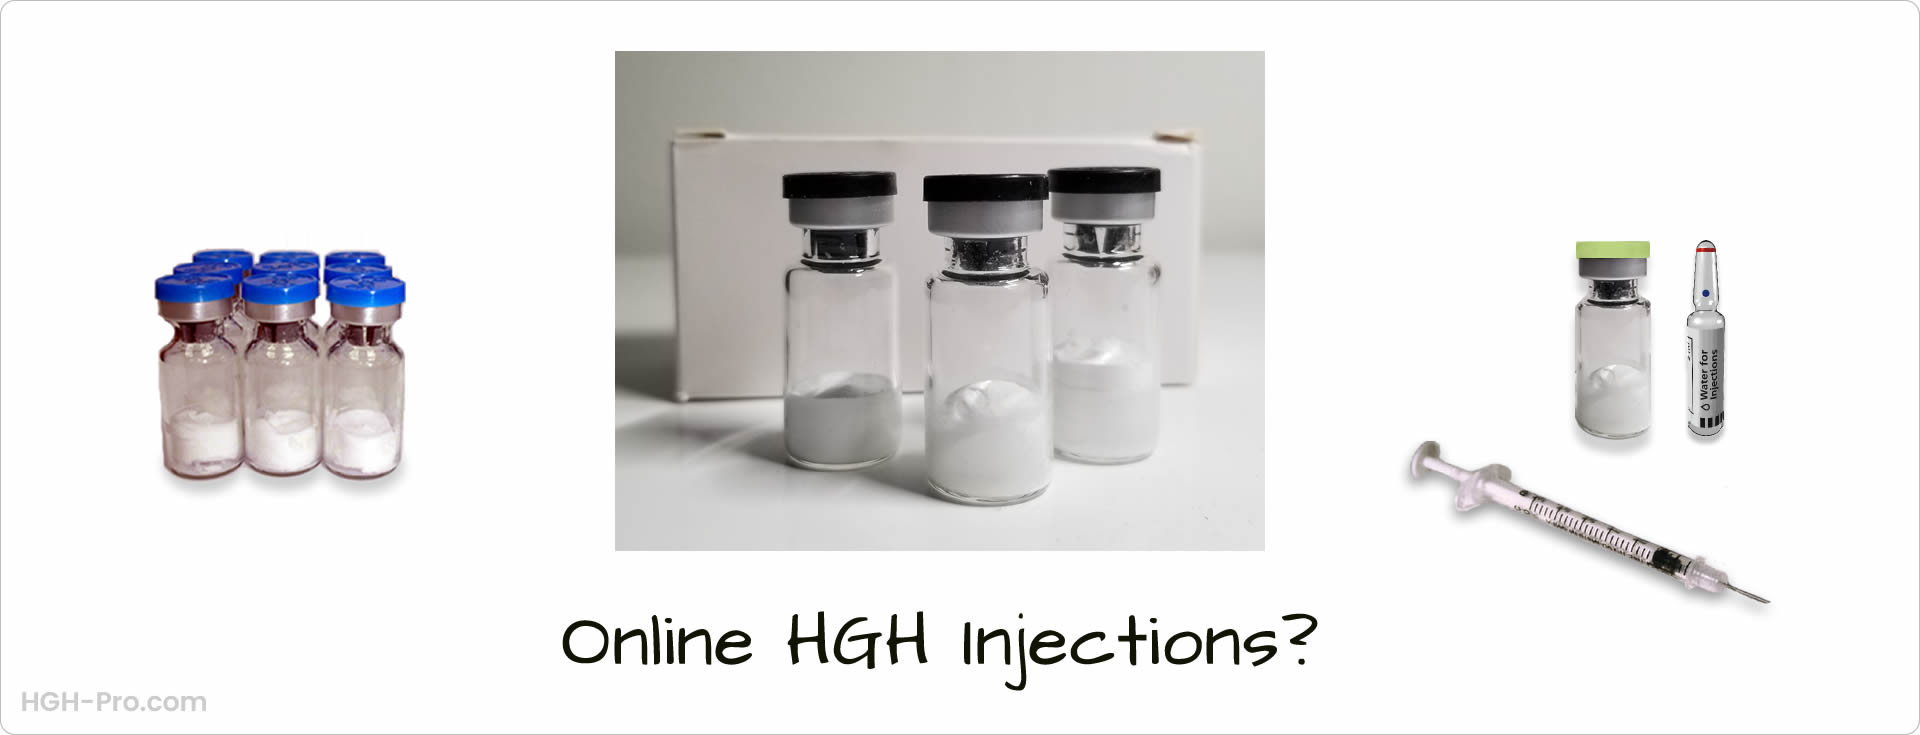 Should You Buy HGH Injections Online?